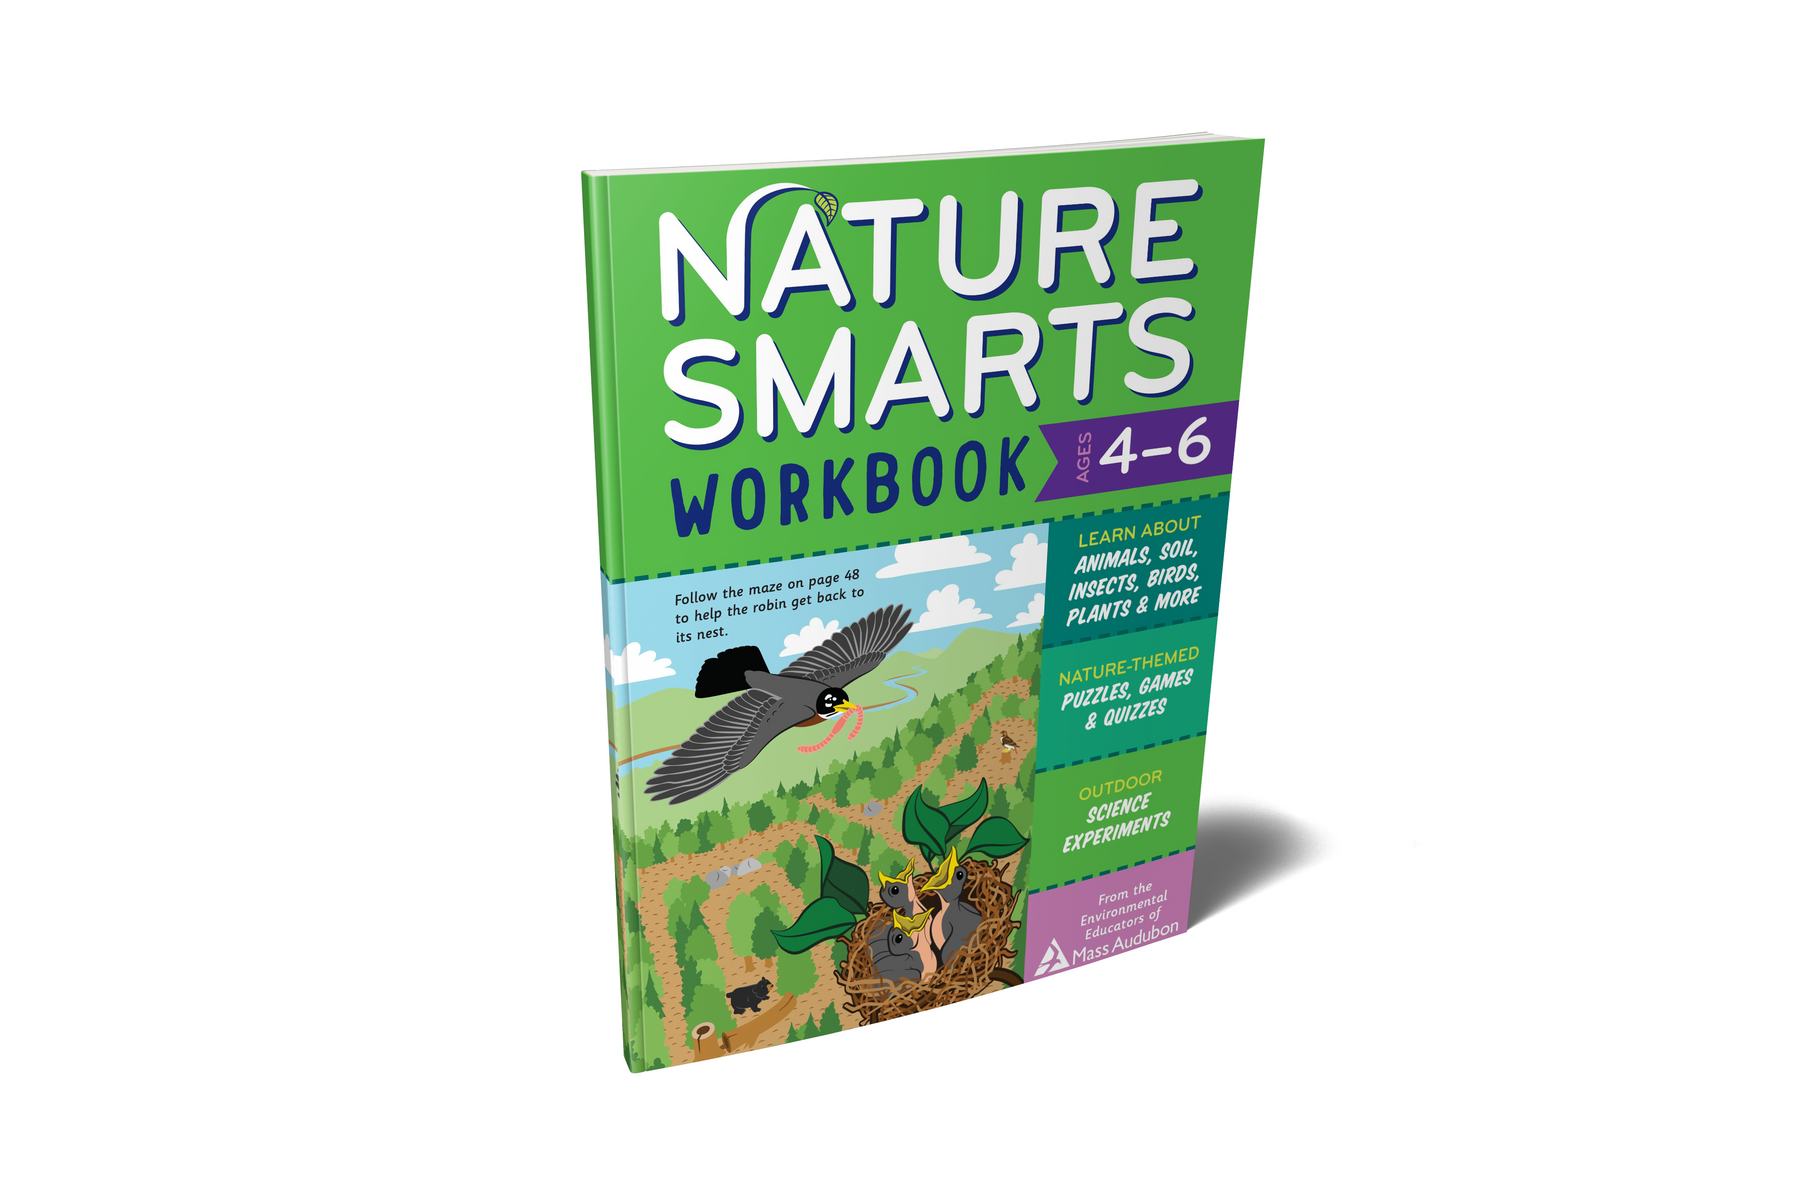 Nature Smarts Workbook (ages 4-6) by Storey